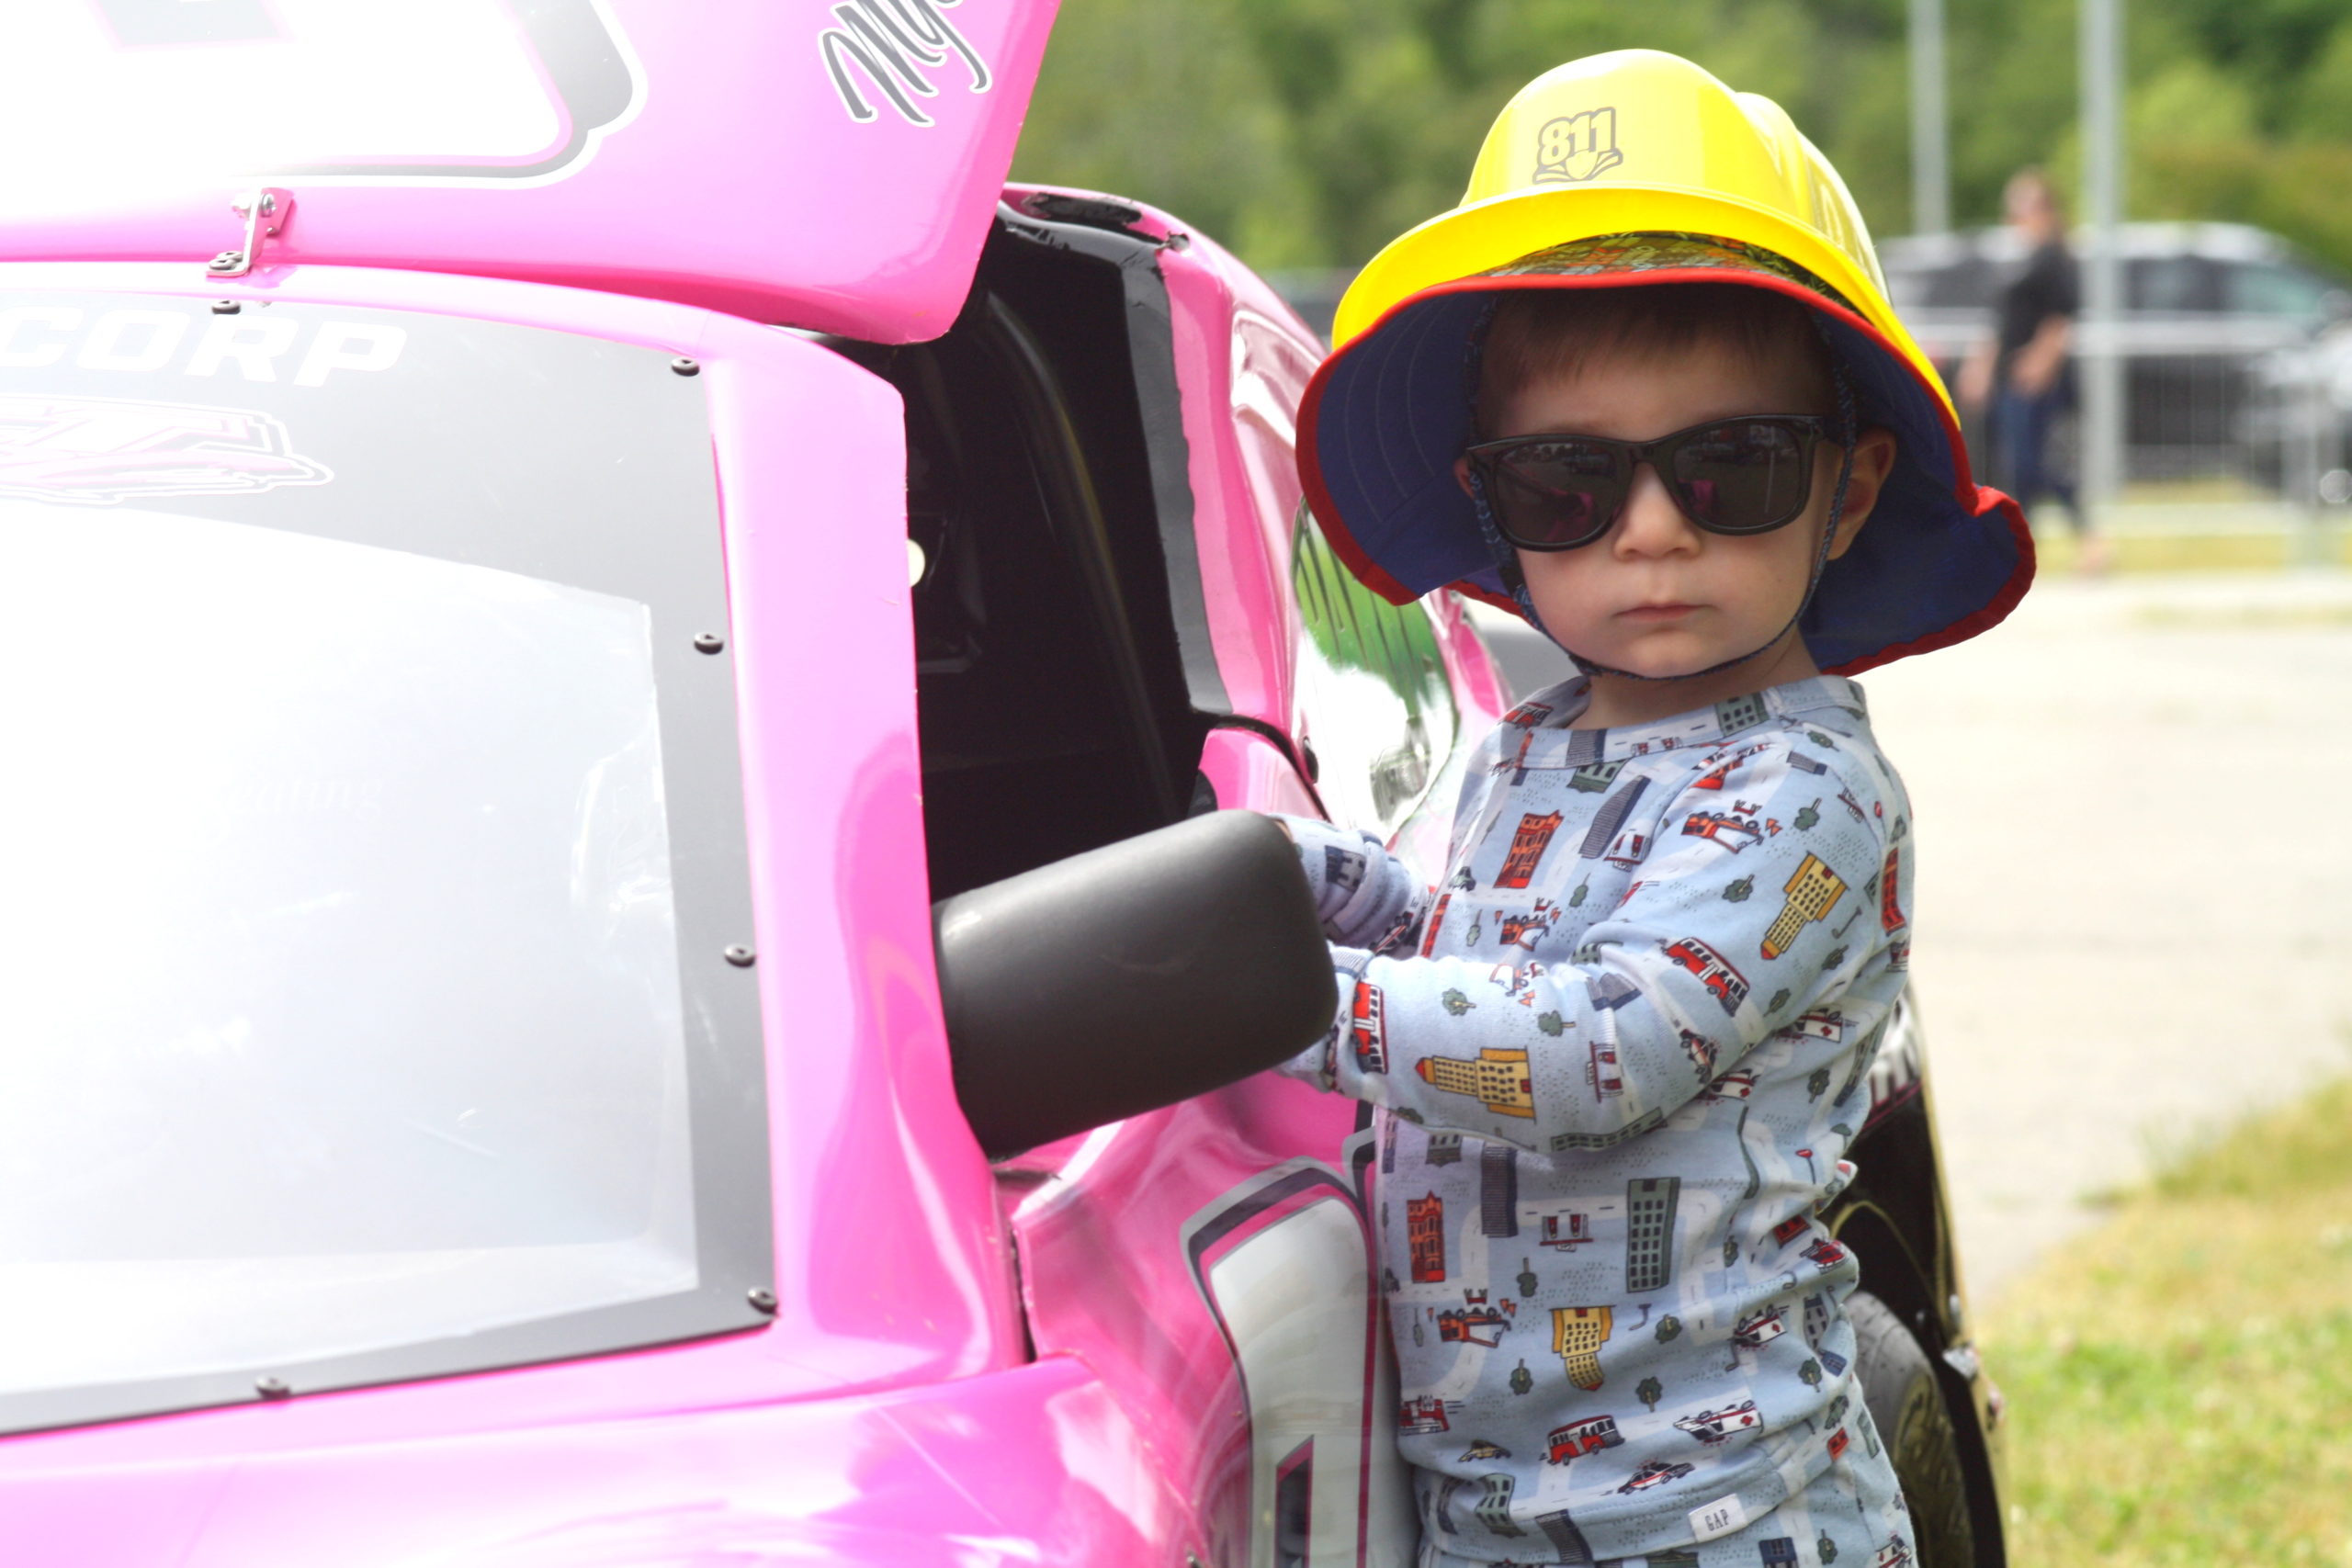 Jaxson Lundberg, 2, of East Hartford, Connecticut, is ready to tear down the track in the 811.com racecar.